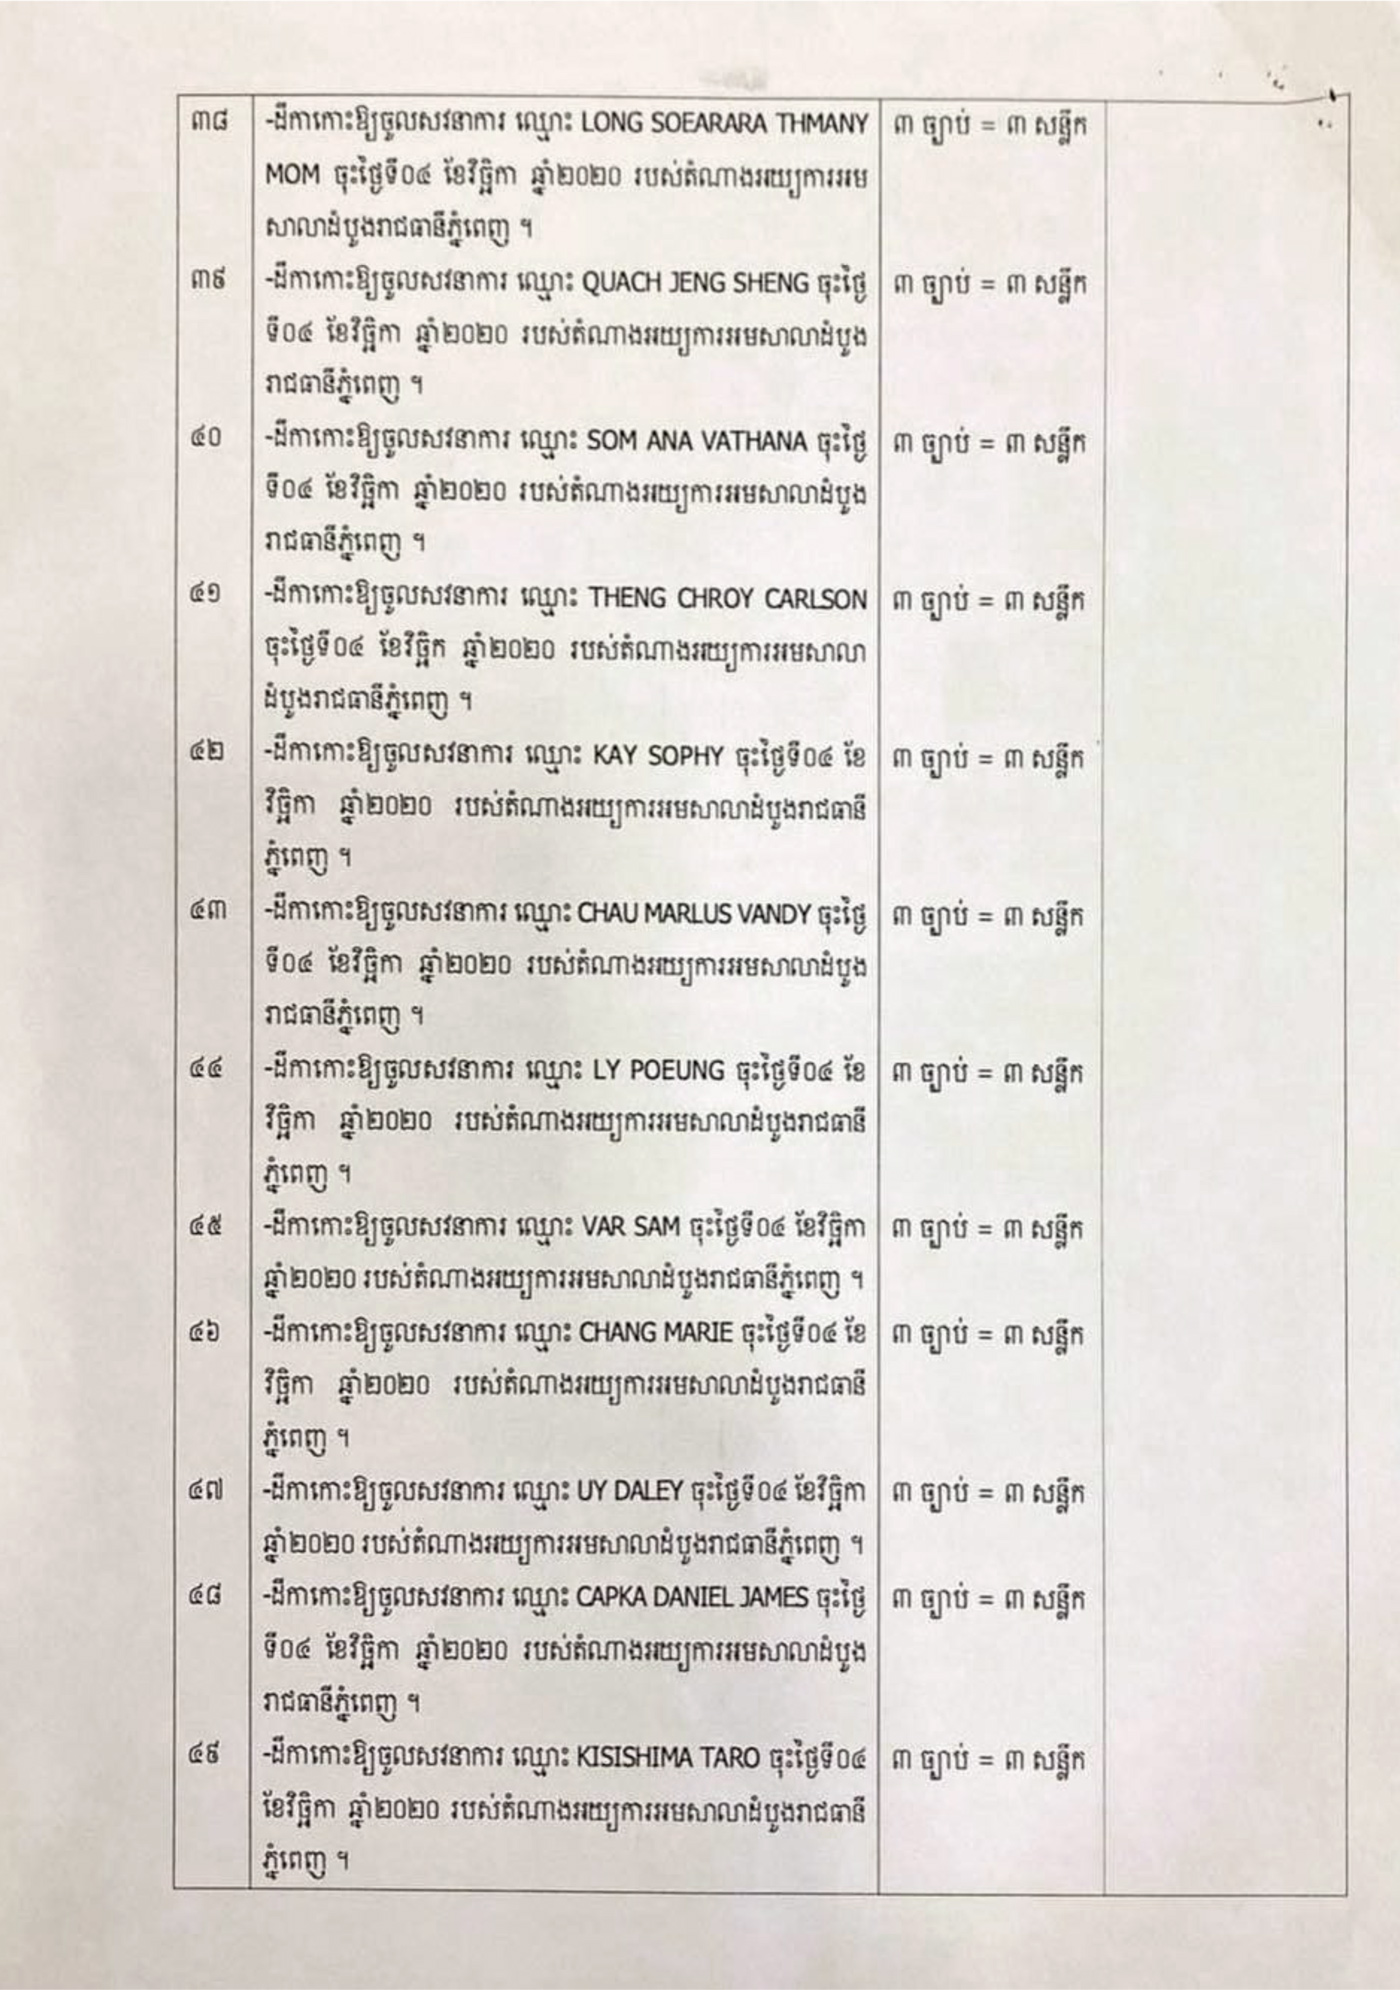 A summons order from the Phnom Penh Municipal Court dated 6 November 2020, showing the names of foreign citizens, including Daniel Capka, who has never been to Cambodia. CNRP vice-president Mu Sochua posted the court documents on Facebook.